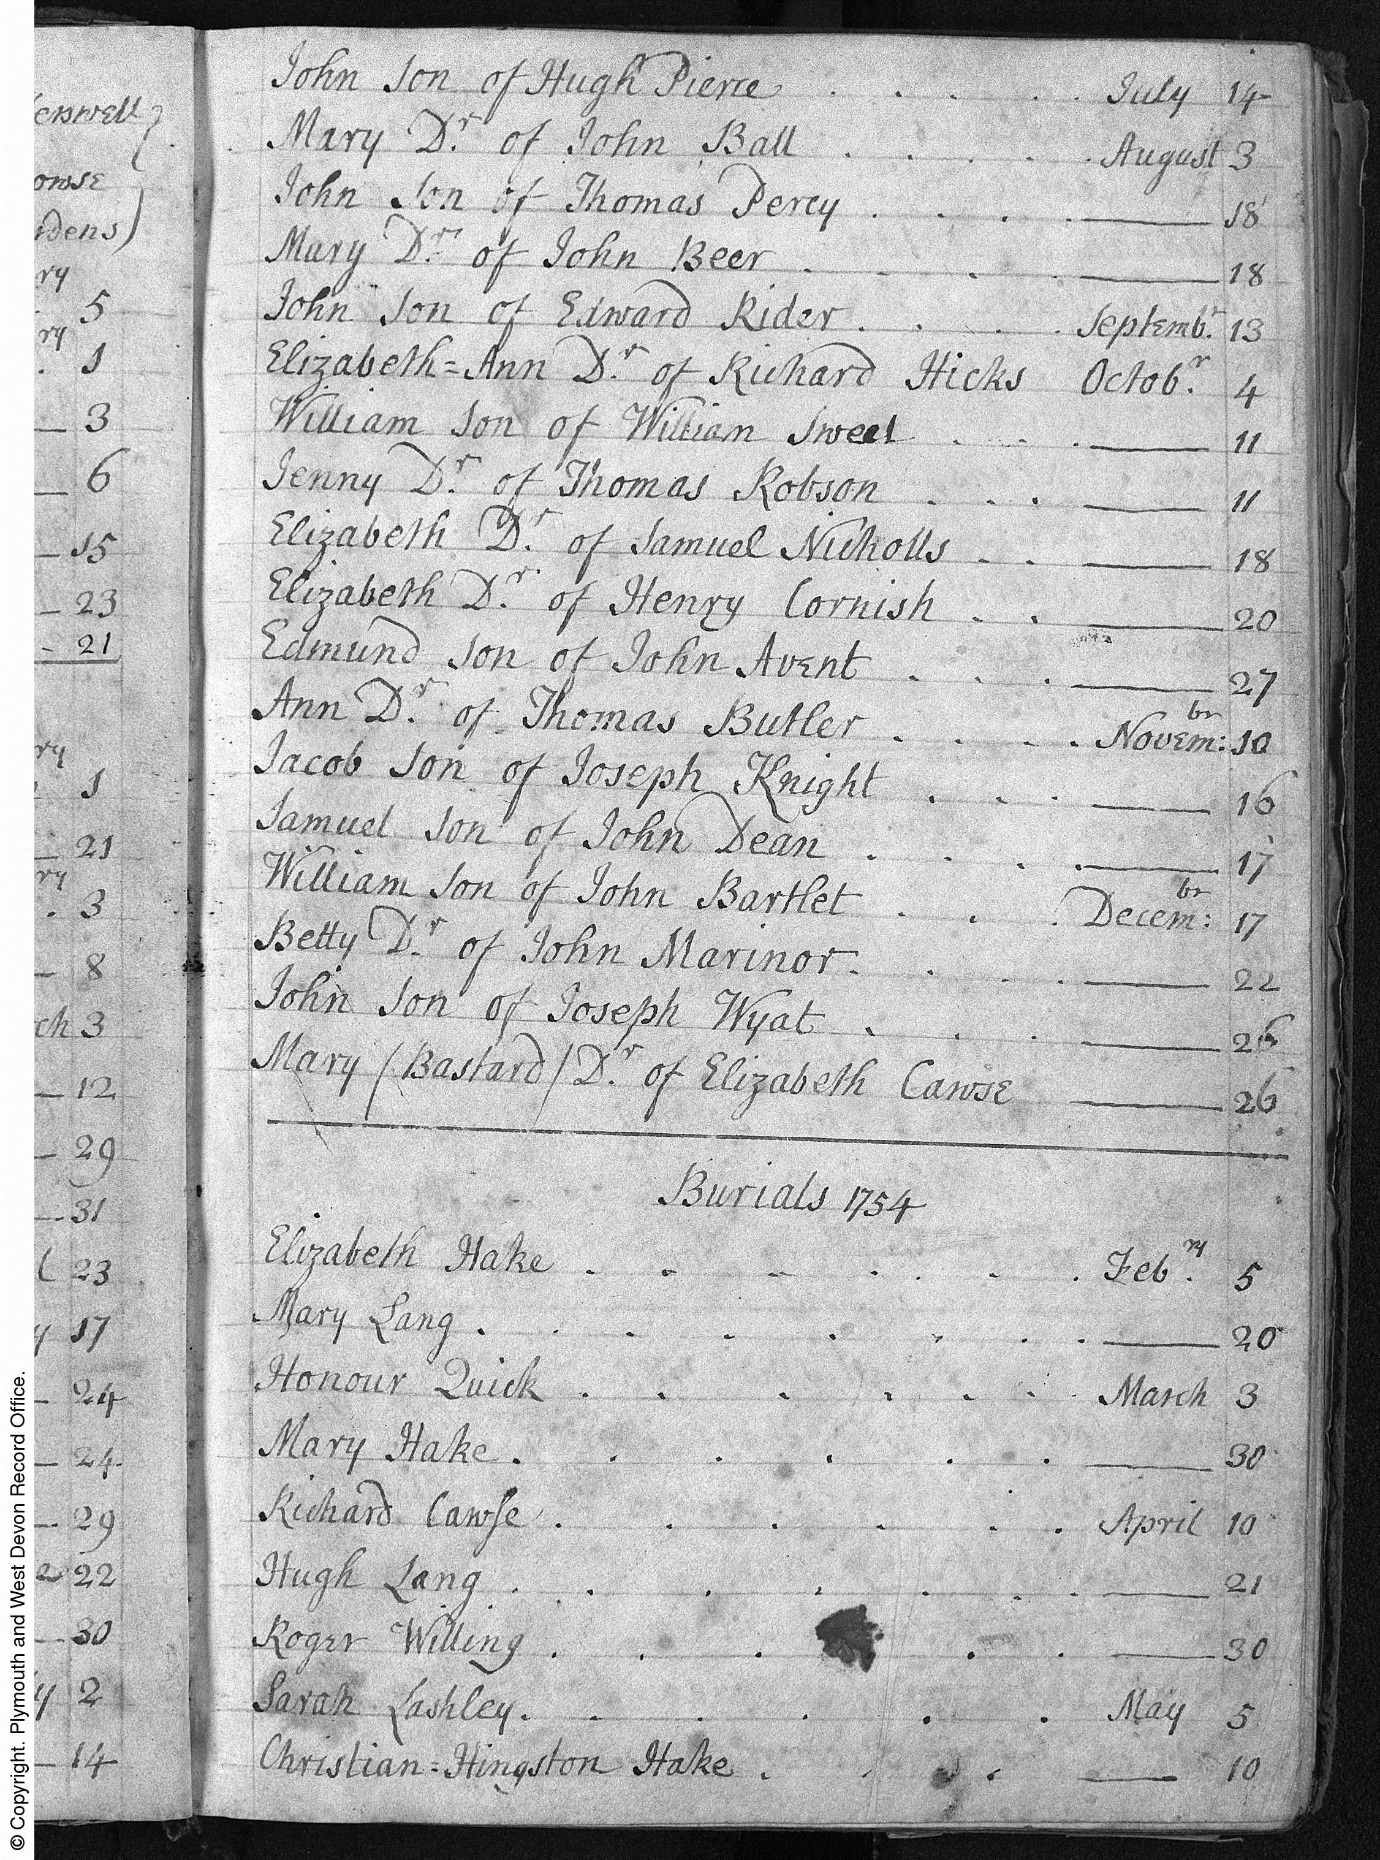 C:\Users\Virginia Rundle\Documents\Ancestry\Northey Moar Files\Beer\Baptism of Mary Beer 18 Aug 1754.jpg